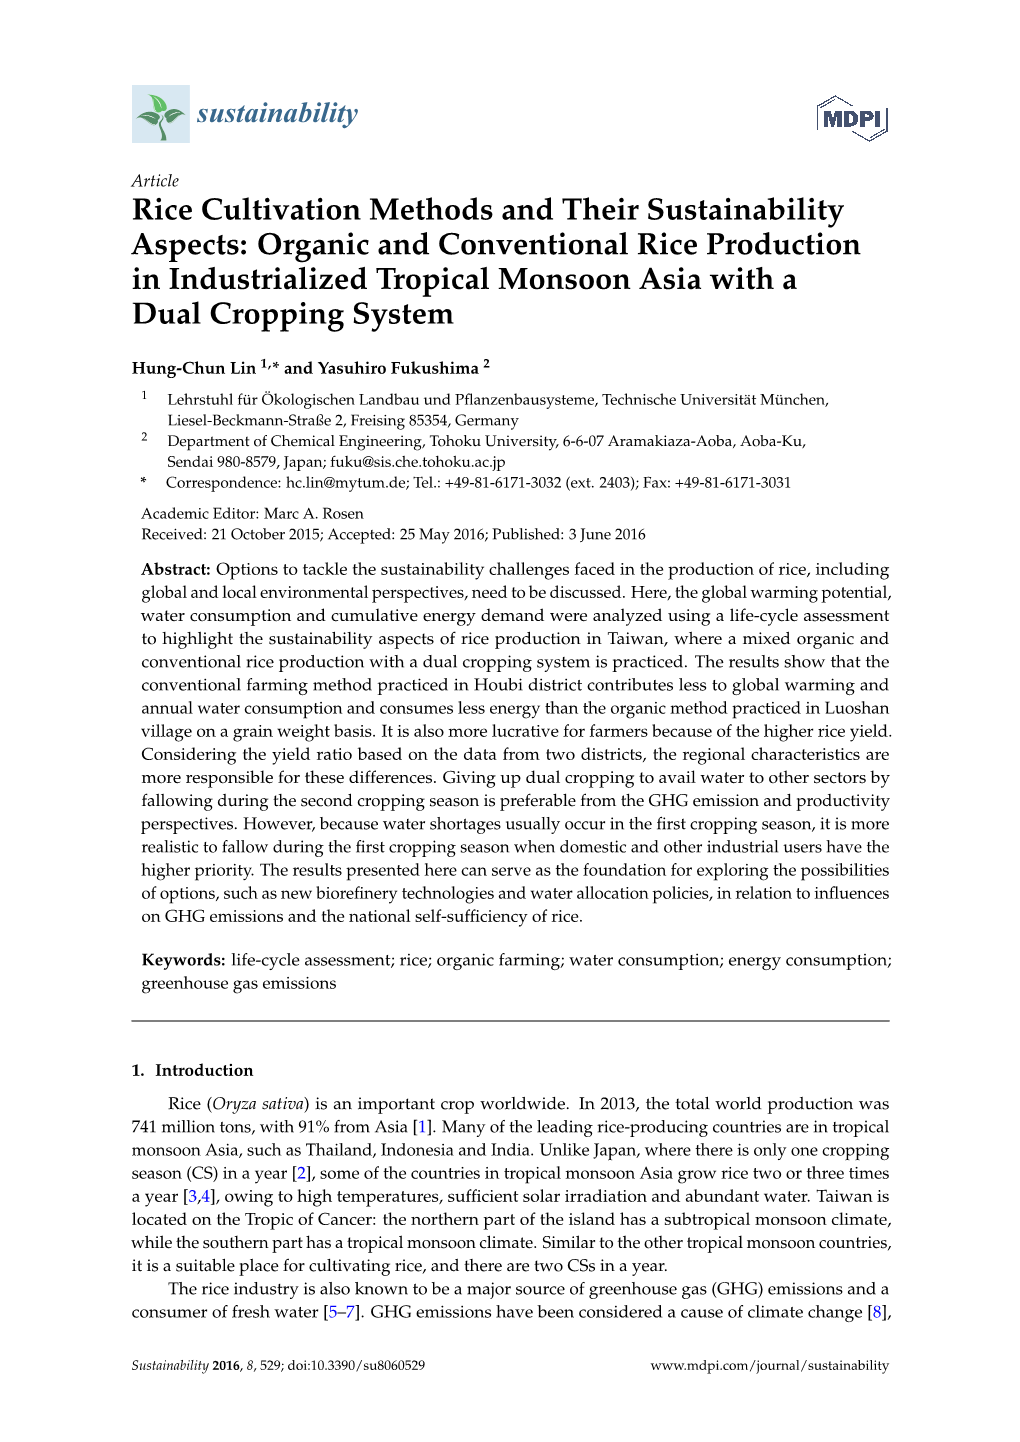 Organic and Conventional Rice Production in Industrialized Tropical Monsoon Asia with a Dual Cropping System